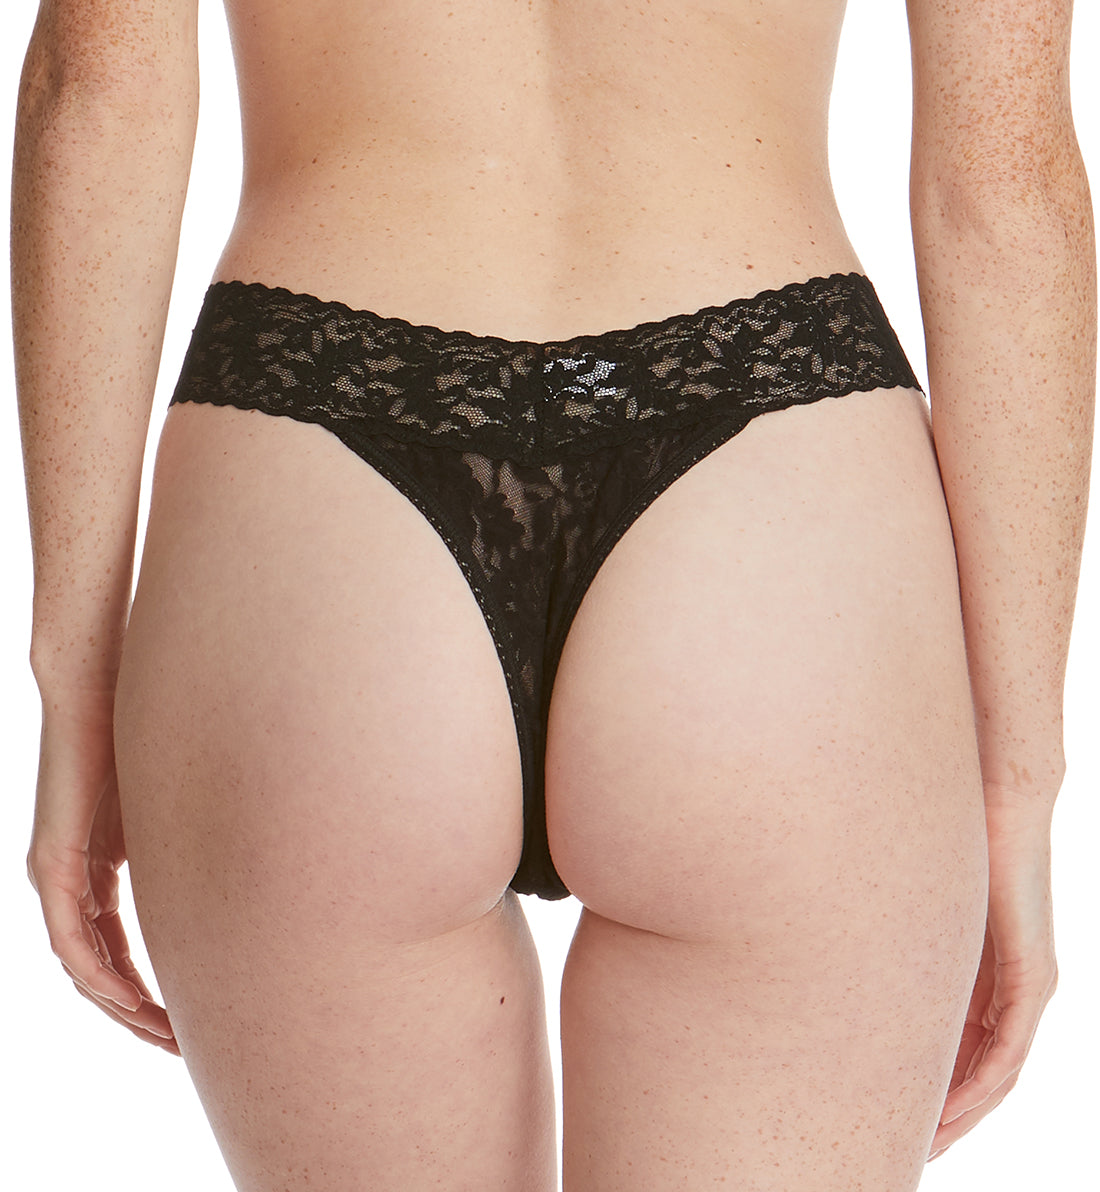 Hanky Panky 3-PACK Signature Lace Original Rise Thong (48113PK),All Black - All Black,One Size